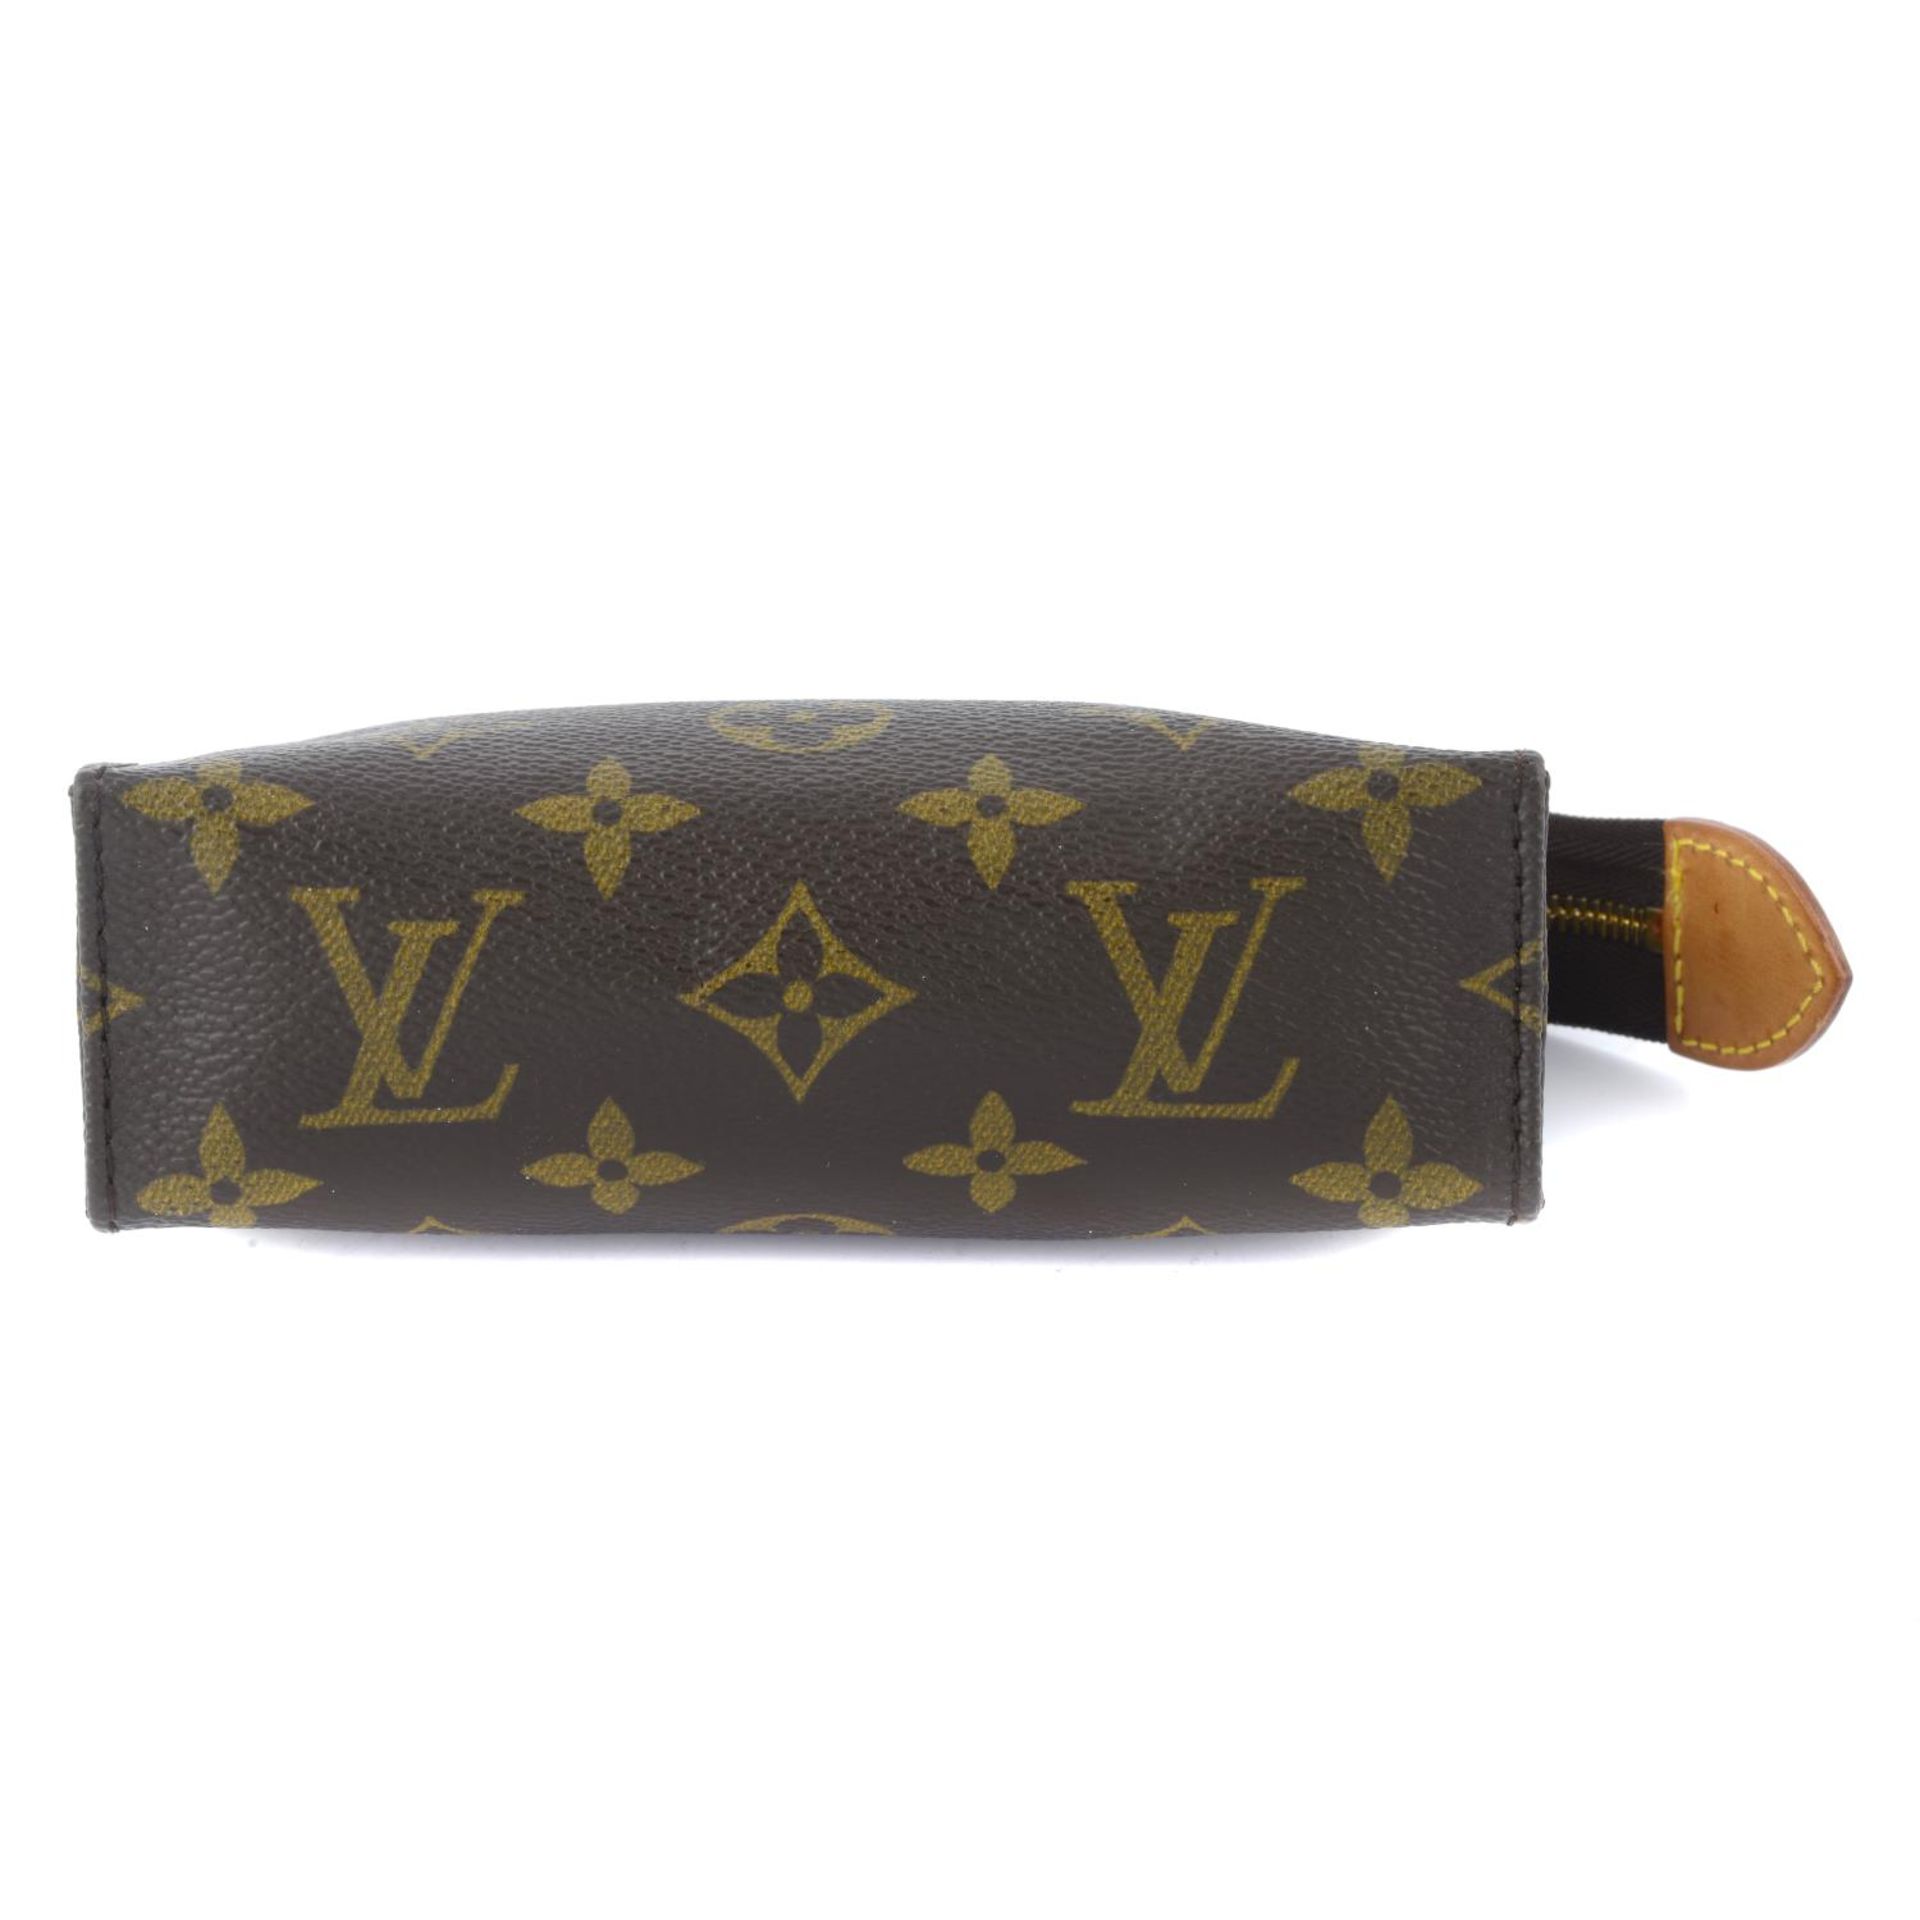 LOUIS VUITTON - a Monogram Toiletry pouch. - Image 4 of 4